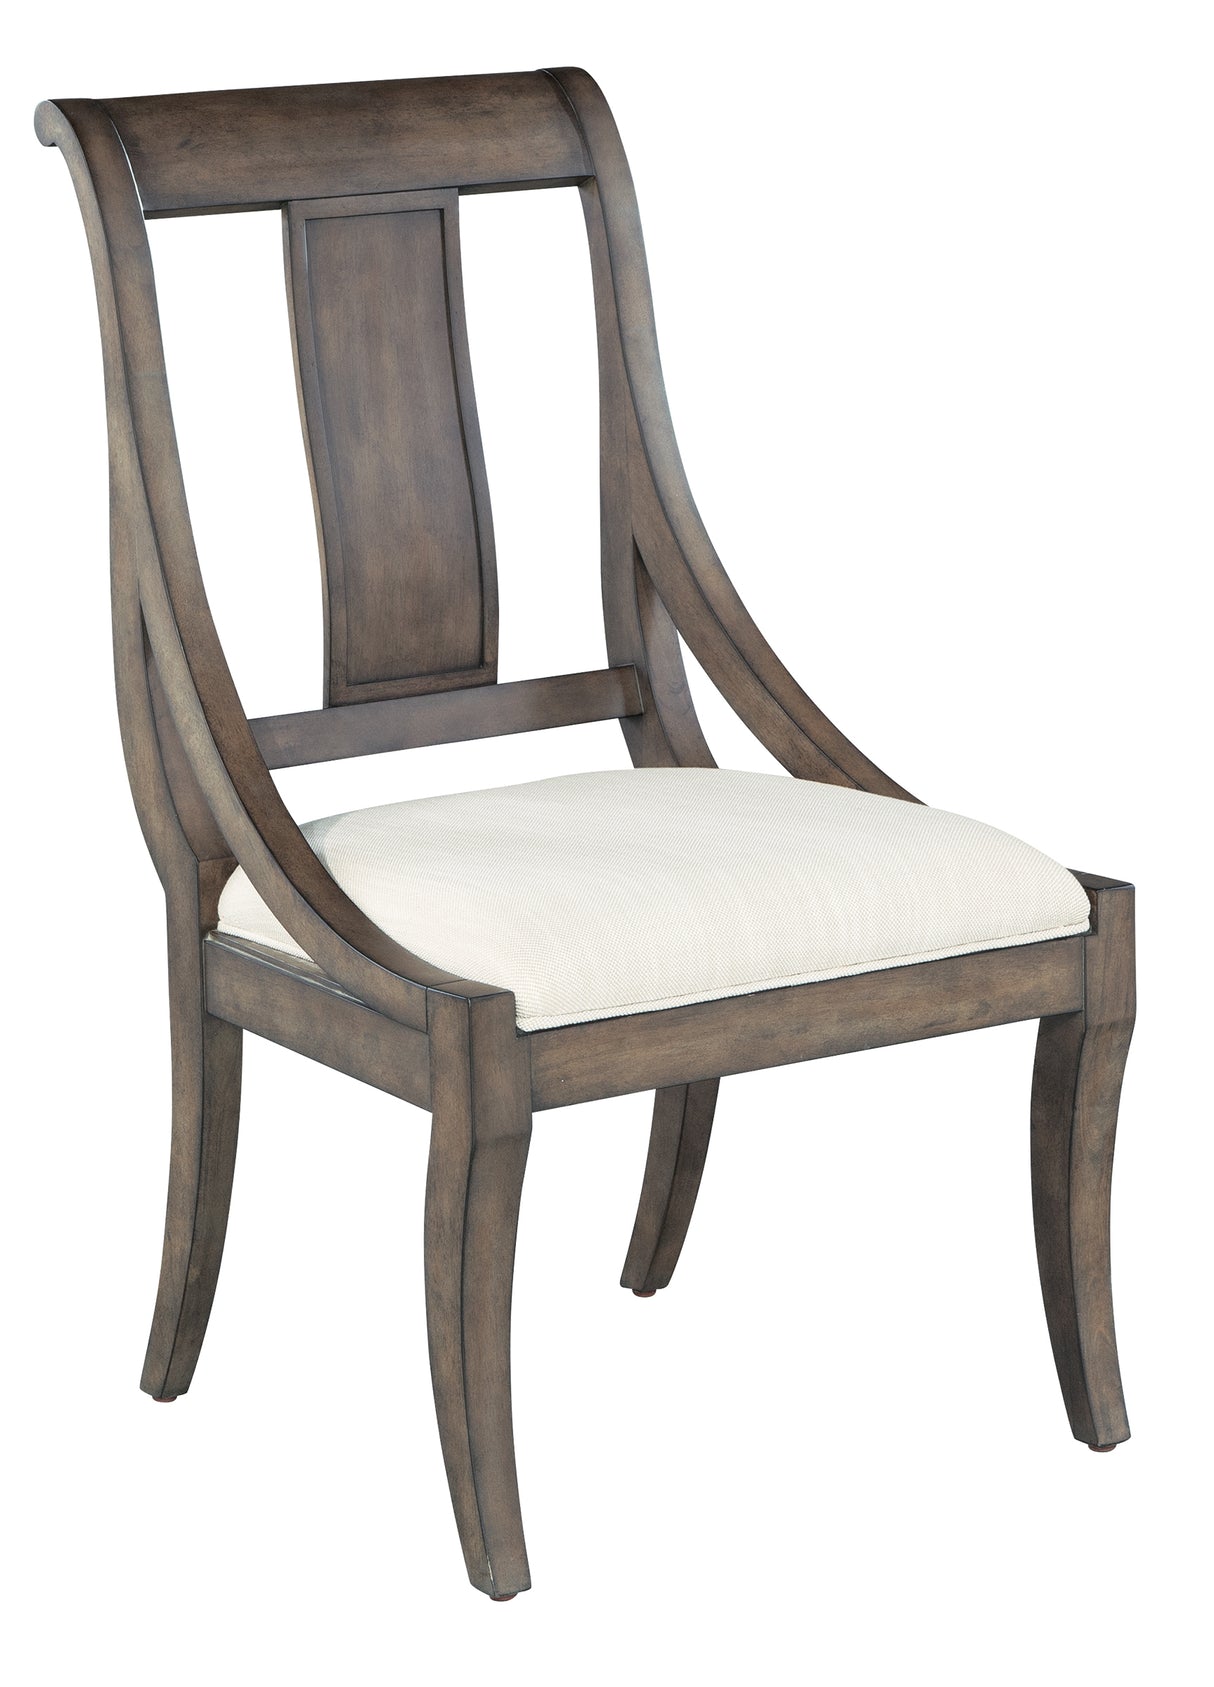 Hekman 23526 Lincoln Park 24in. x 25in. x 41in. Dining Side Chair